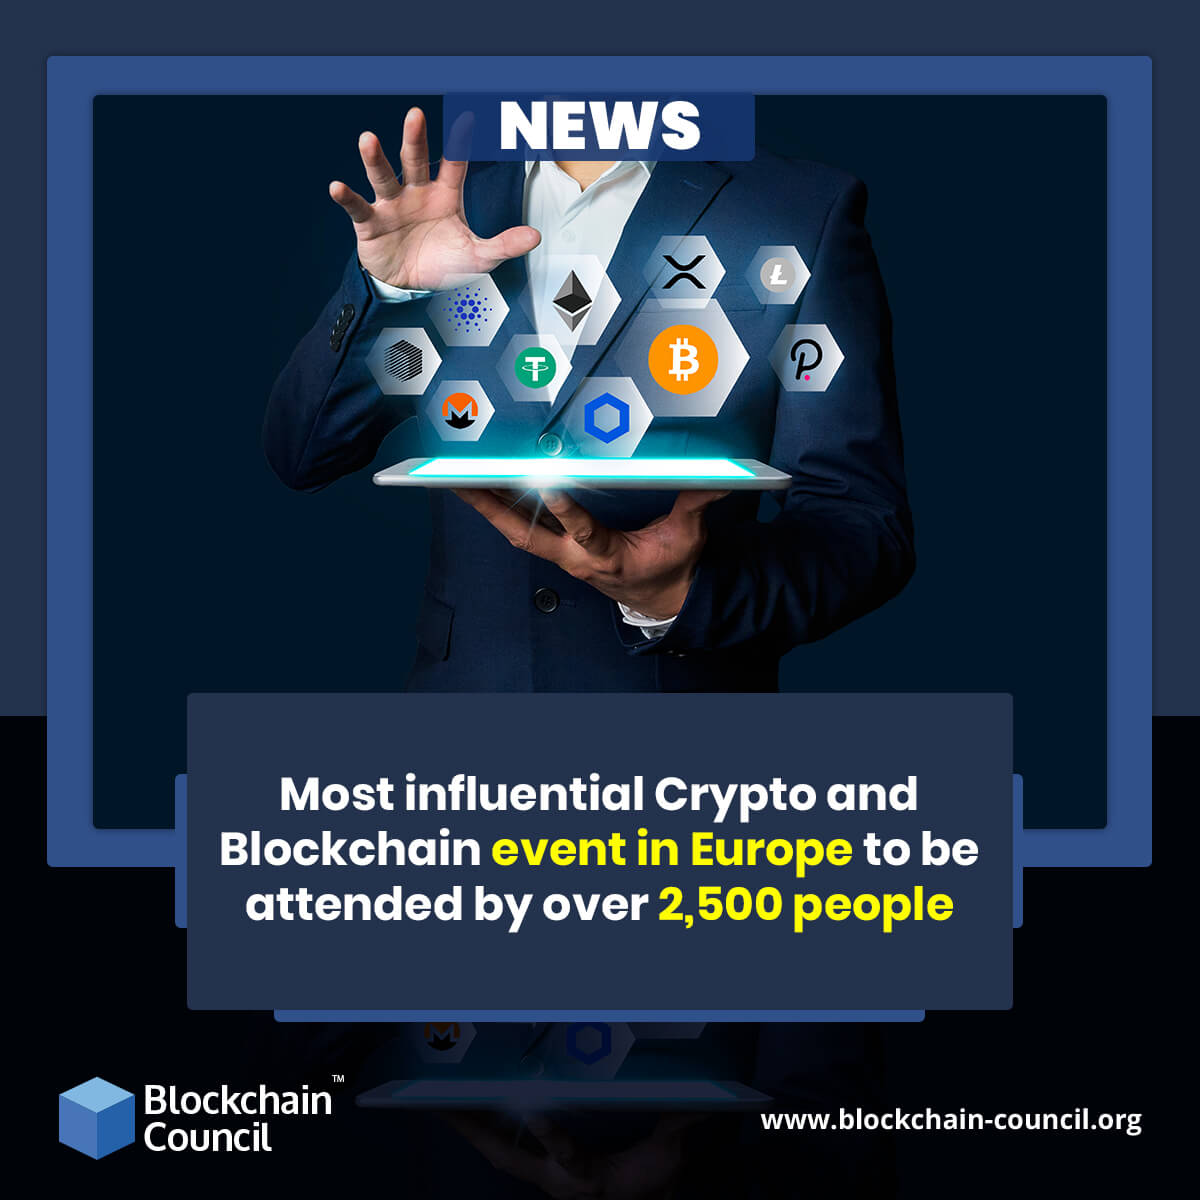 Most influential Crypto and Blockchain event in Europe to be attended by over 2,500 people